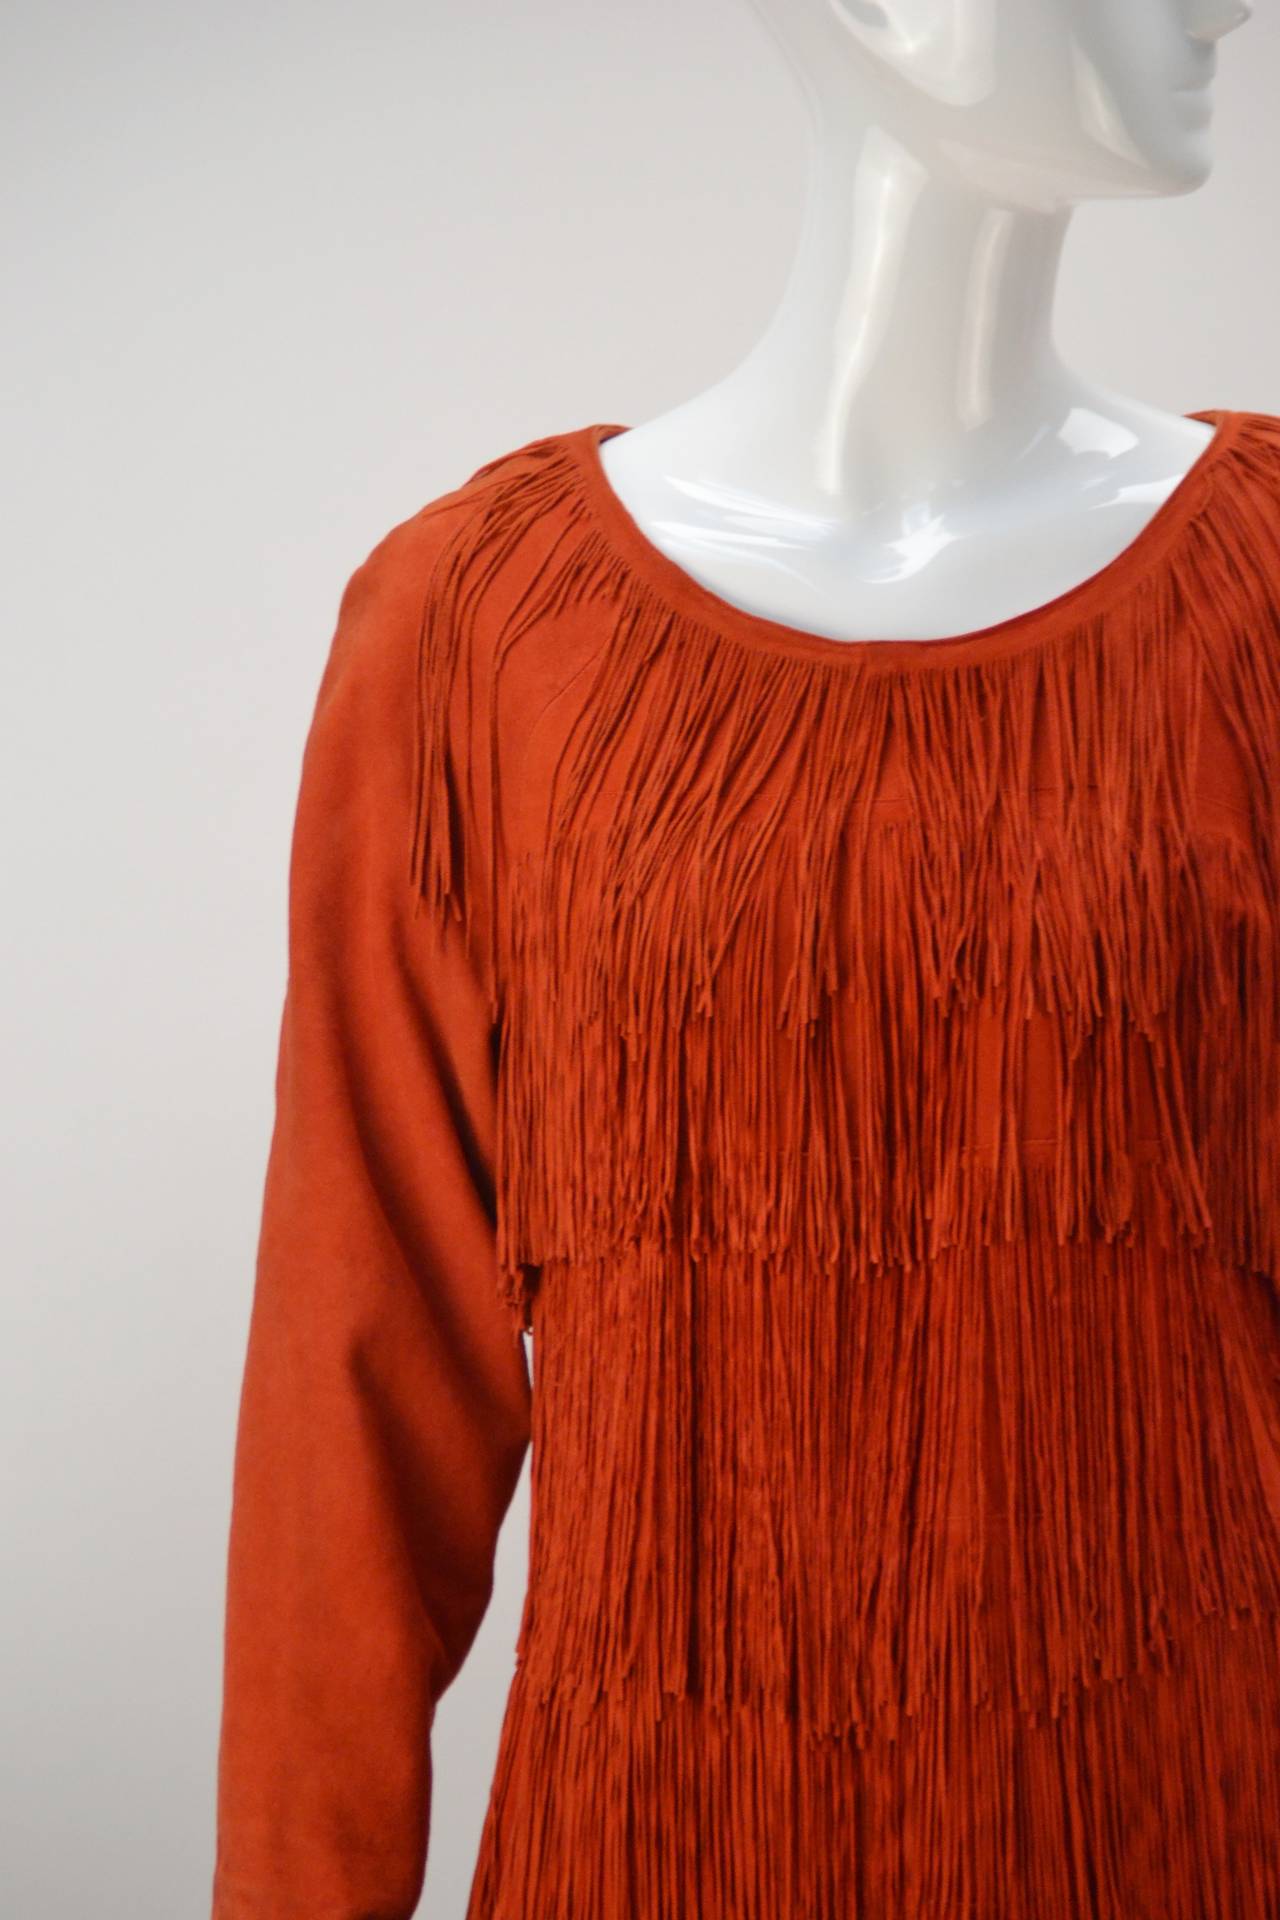 Women's 1980s Mario Valentino Leather Red Fringed Dress